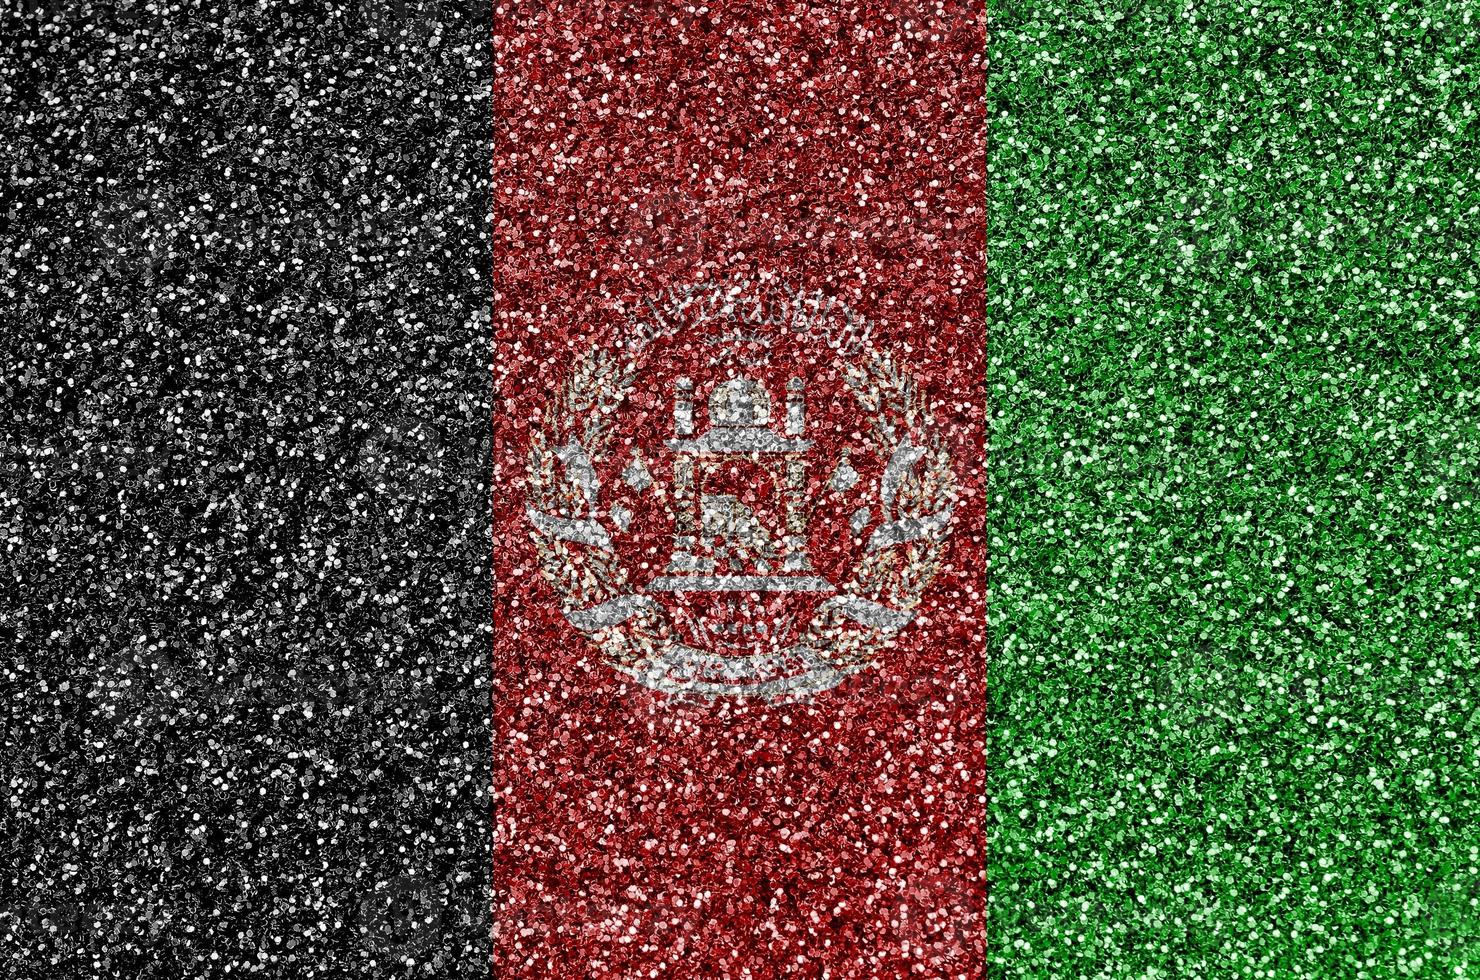 Afghanistan flag depicted on many small shiny sequins. Colorful festival background for party photo